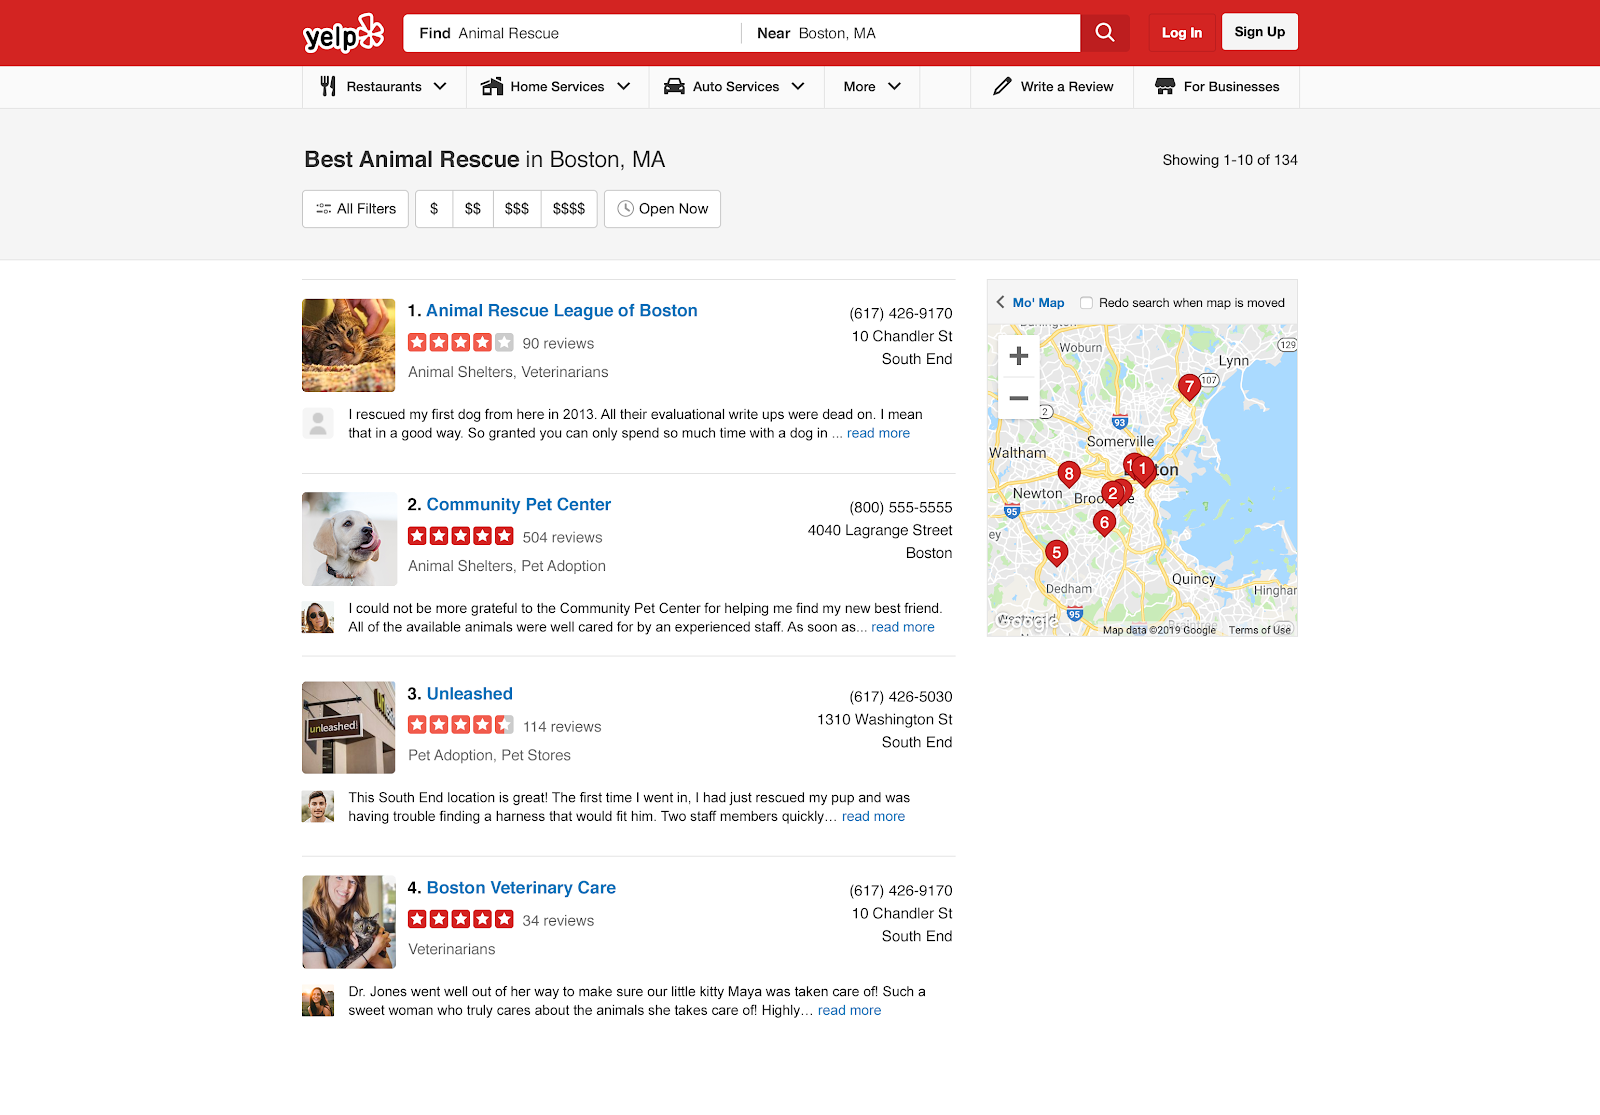 example of Yelp nonprofit listings